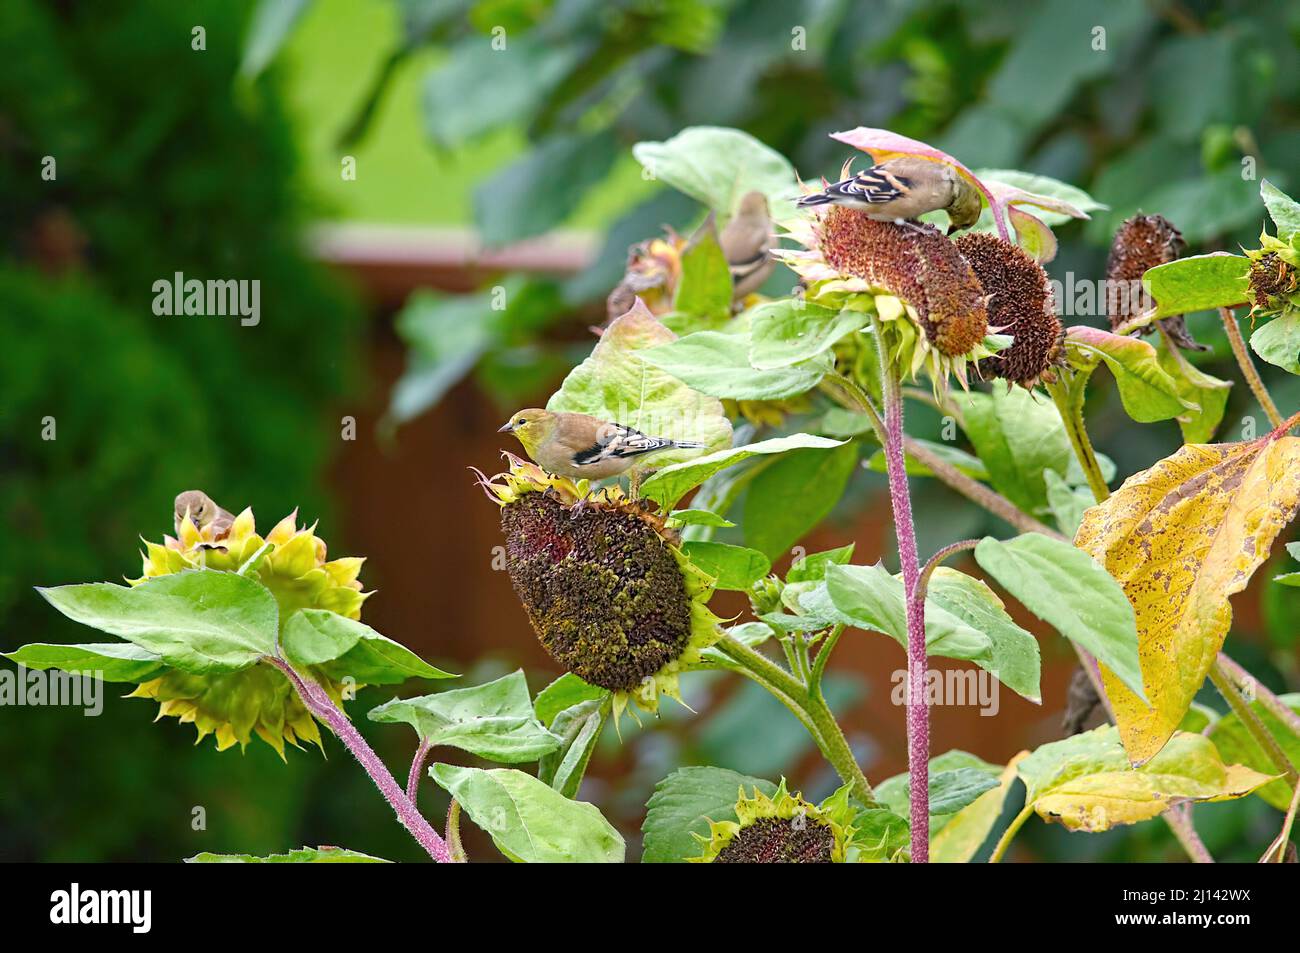 Several American Goldfinch (Spinus tristis) non-breeding males, eating seeds from sunflowers. Stock Photo